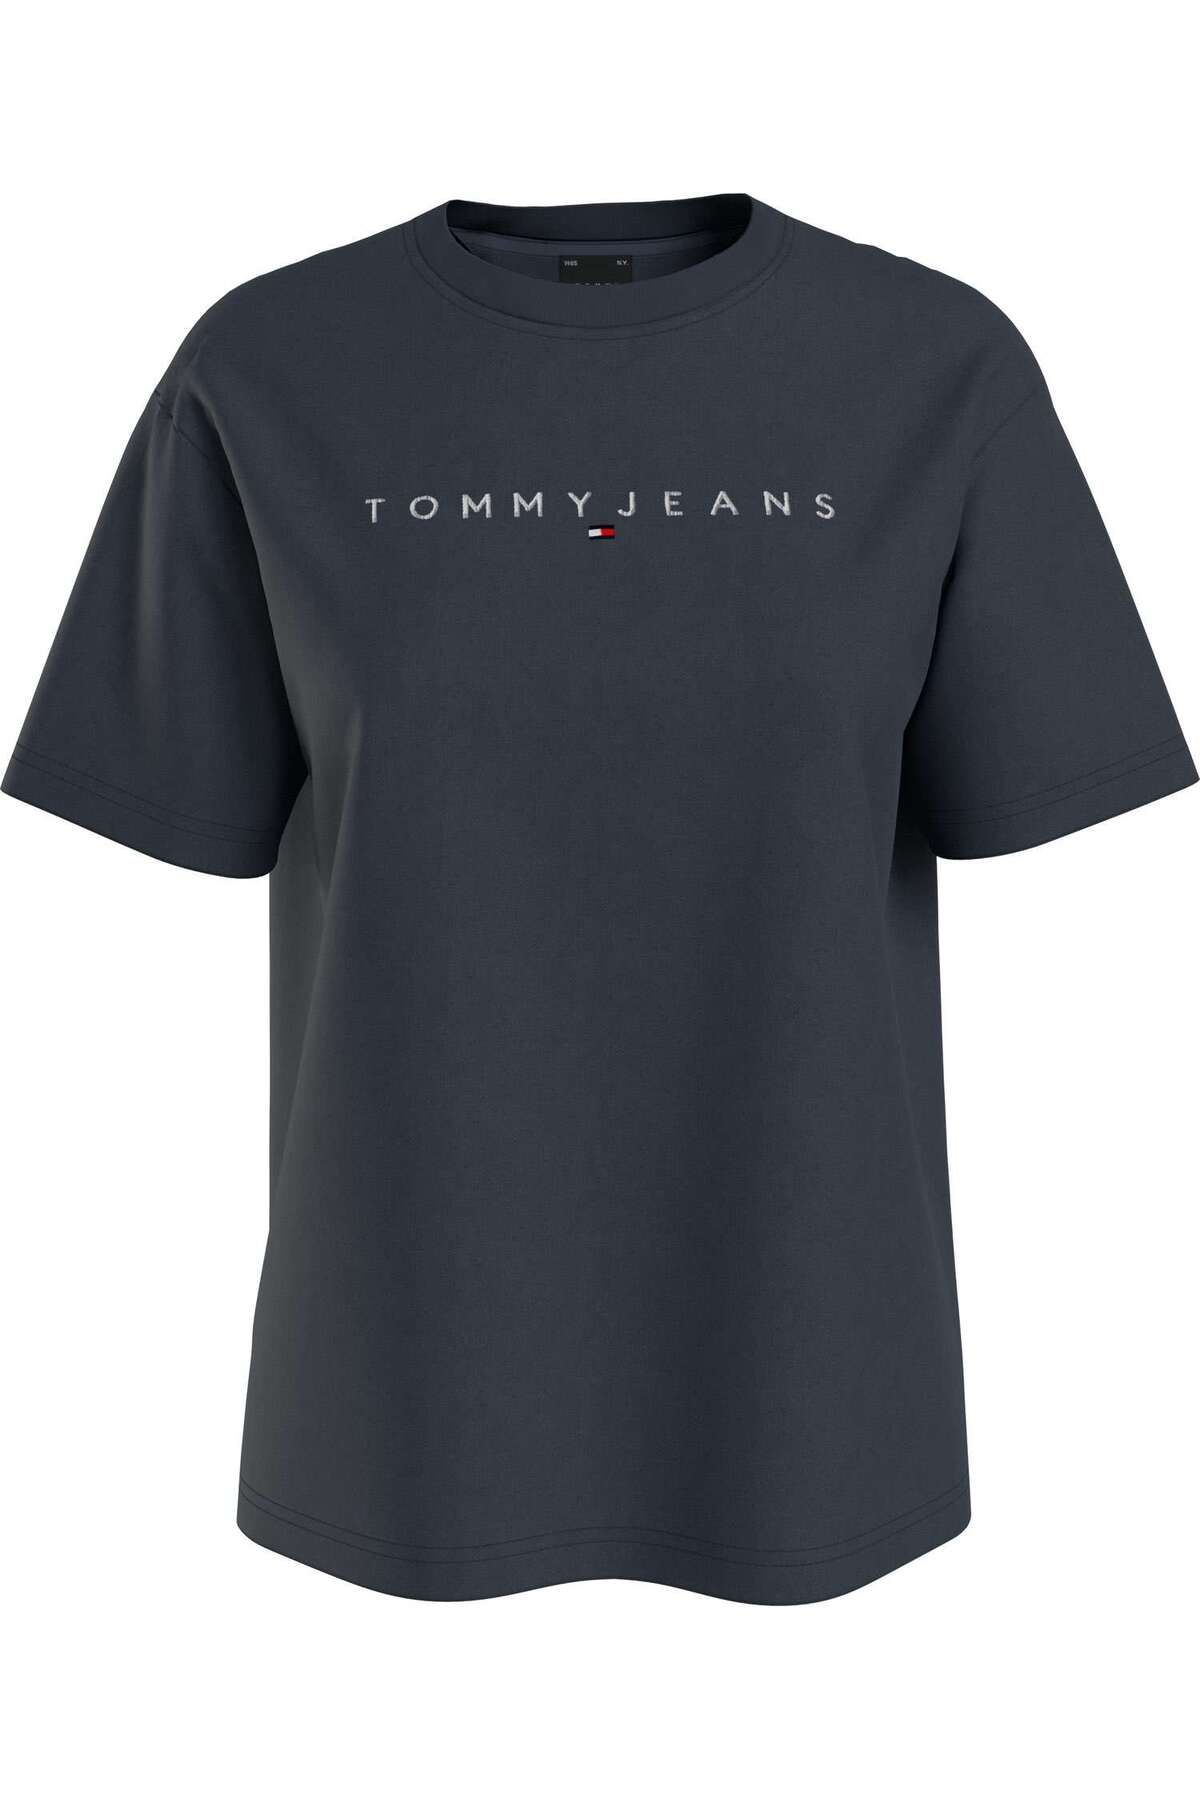 Tommy Hilfiger TOMMY JEANS KADIN RELAXED FİT NEW LINEAR T-SHIRT